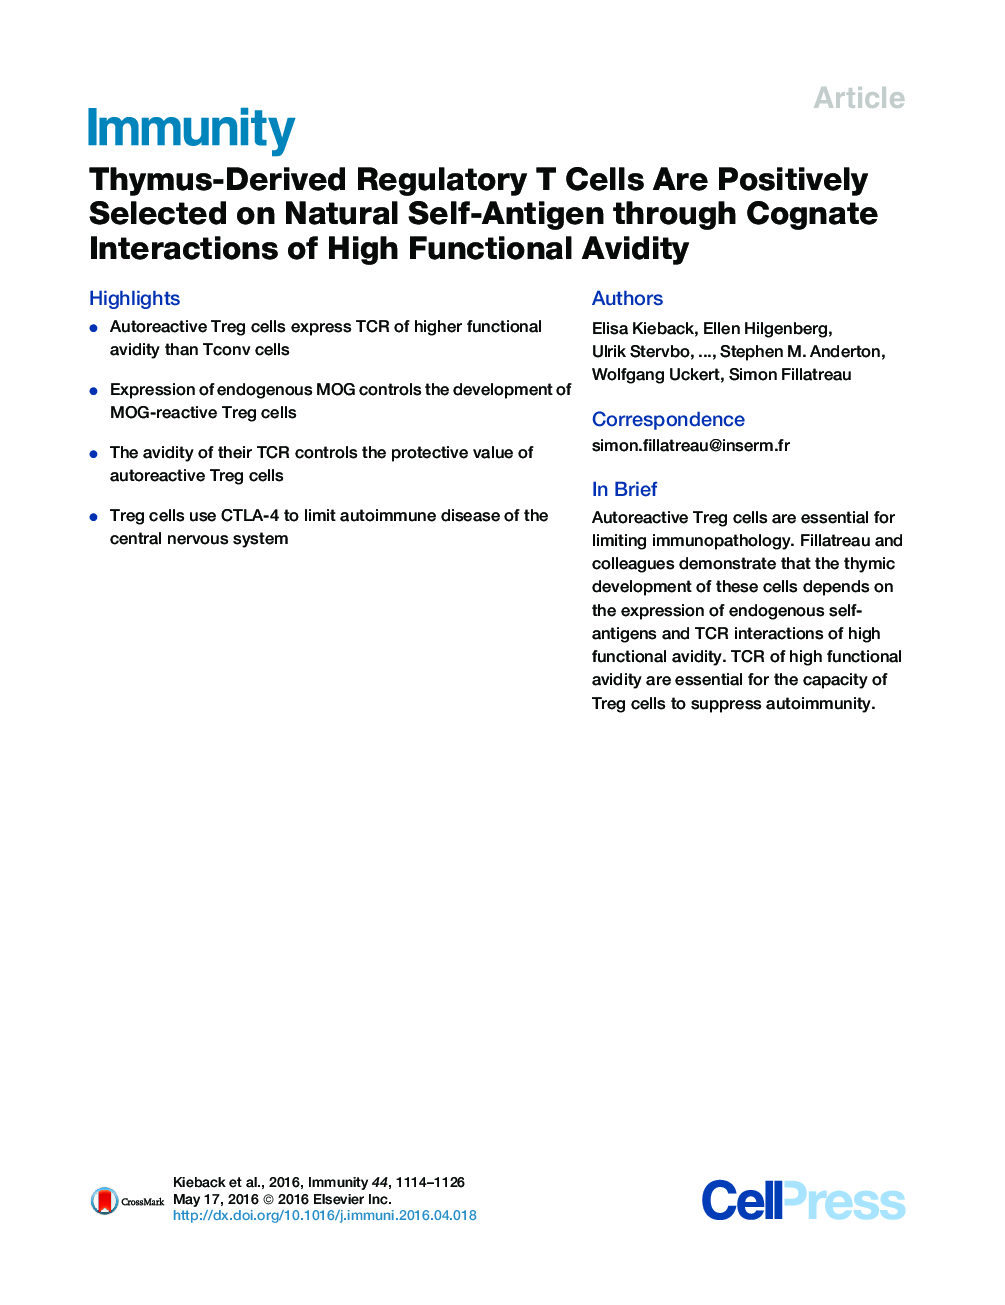 Thymus-Derived Regulatory T Cells Are Positively Selected on Natural Self-Antigen through Cognate Interactions of High Functional Avidity